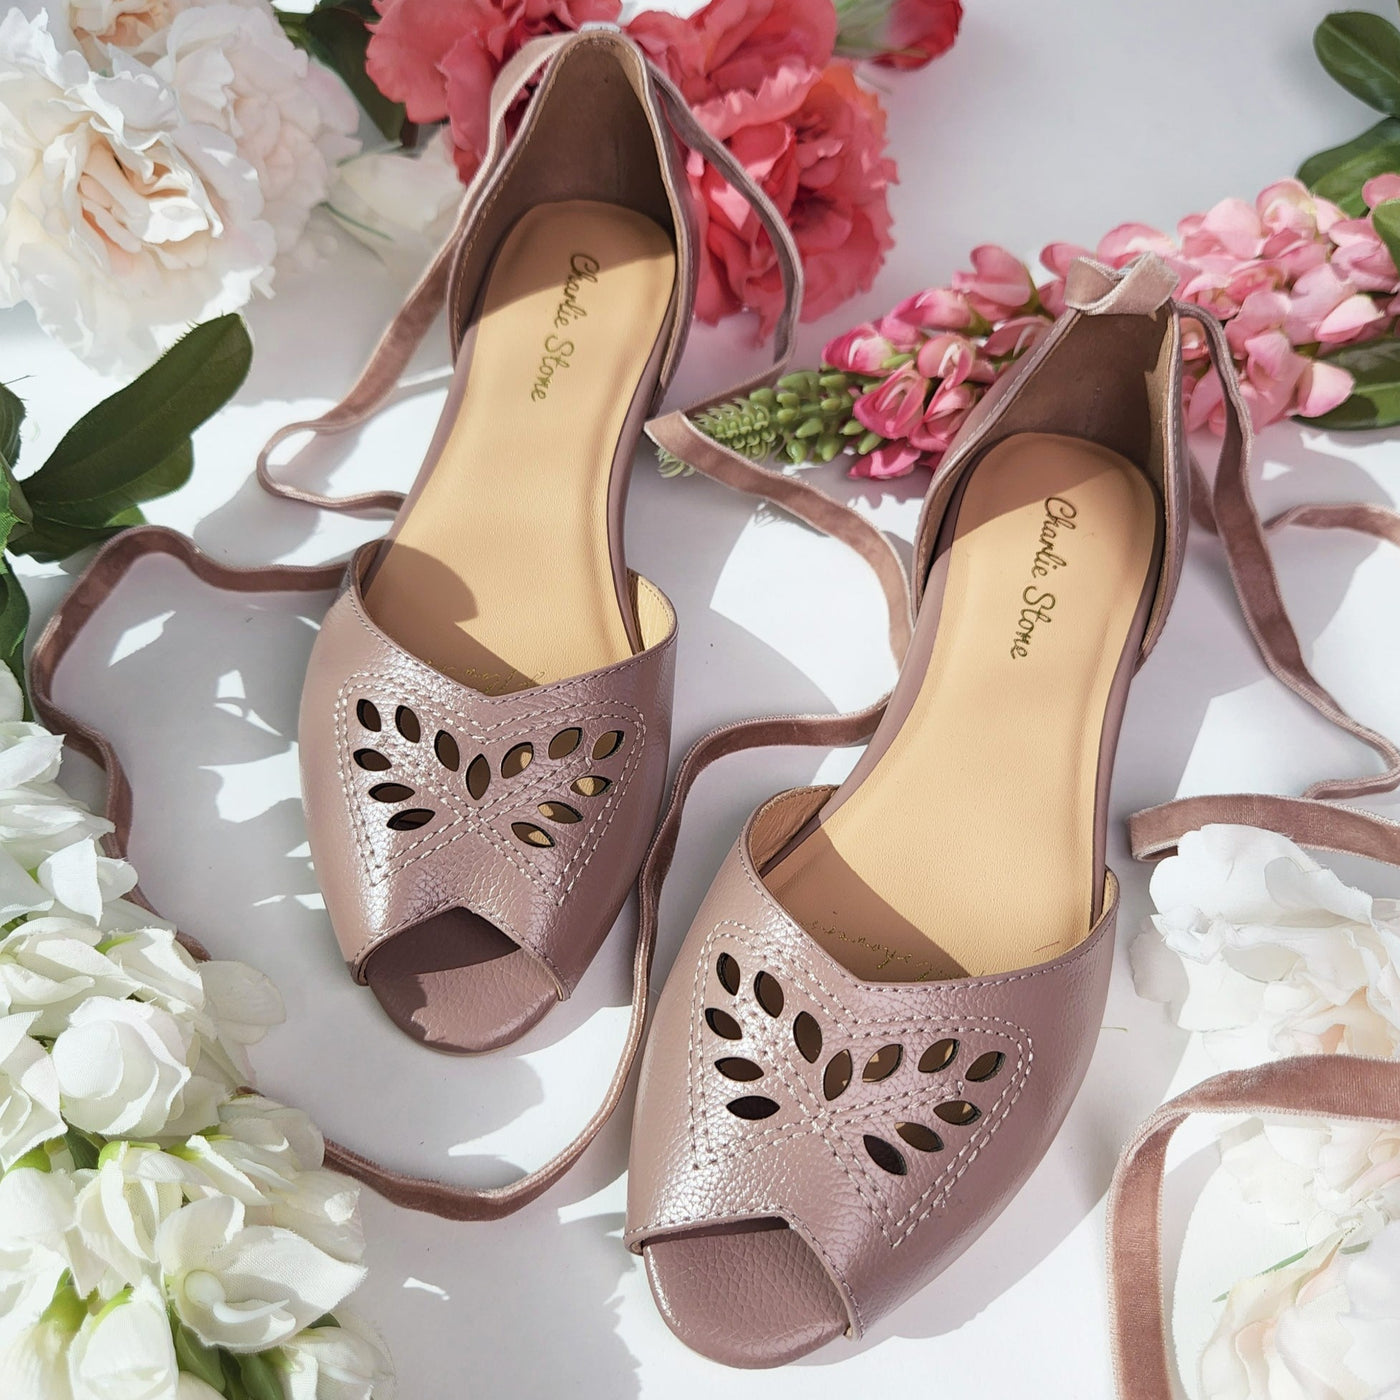 Charlie Stone Vintage Inspired Flats Retro 1940’s 1950’s Style Ladies Shoes taupe ballerina